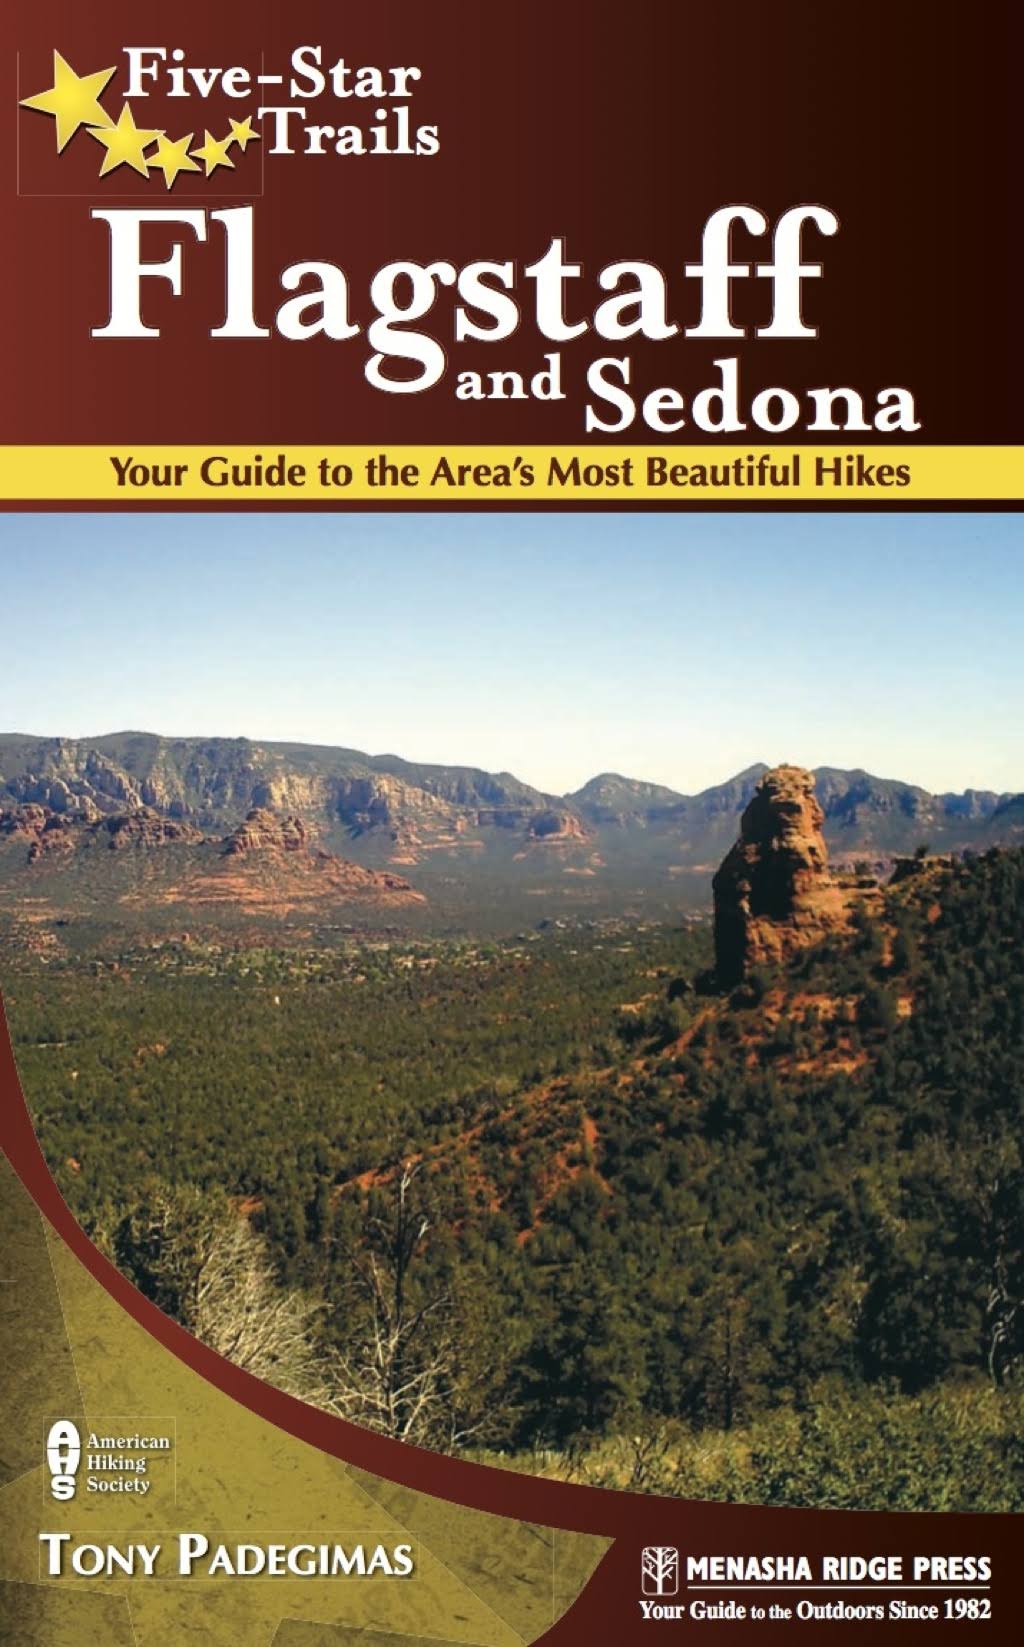 Five-Star Trails: Flagstaff and Sedona: Your Guide to the Area's Most Beautiful Hikes [Book]